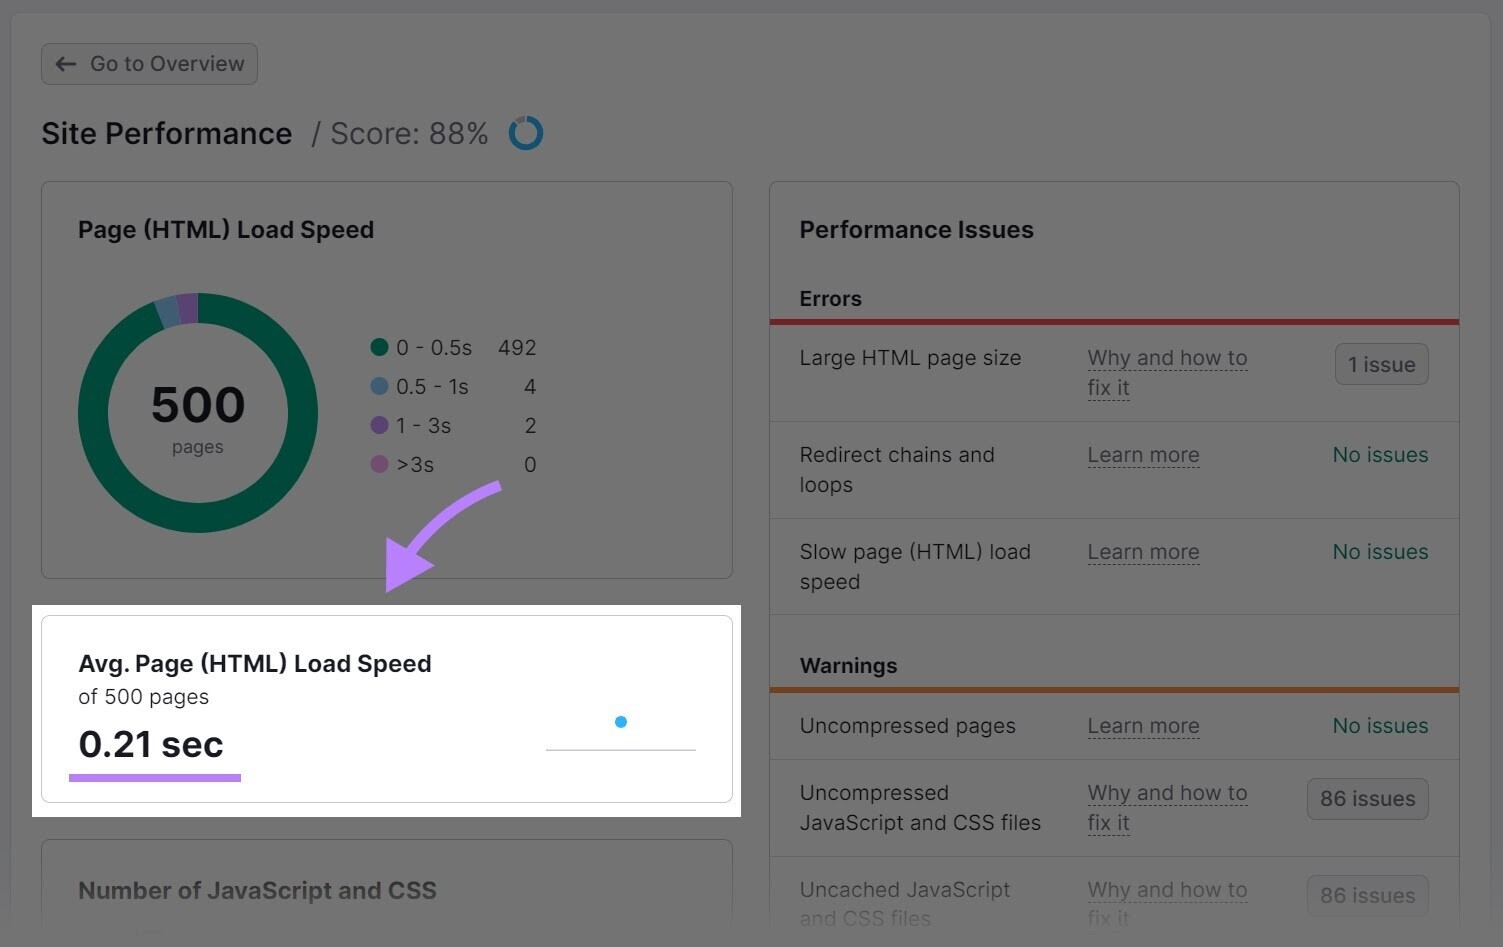 Average page load speed showing 0.21 sec in the "Site Performance" report.